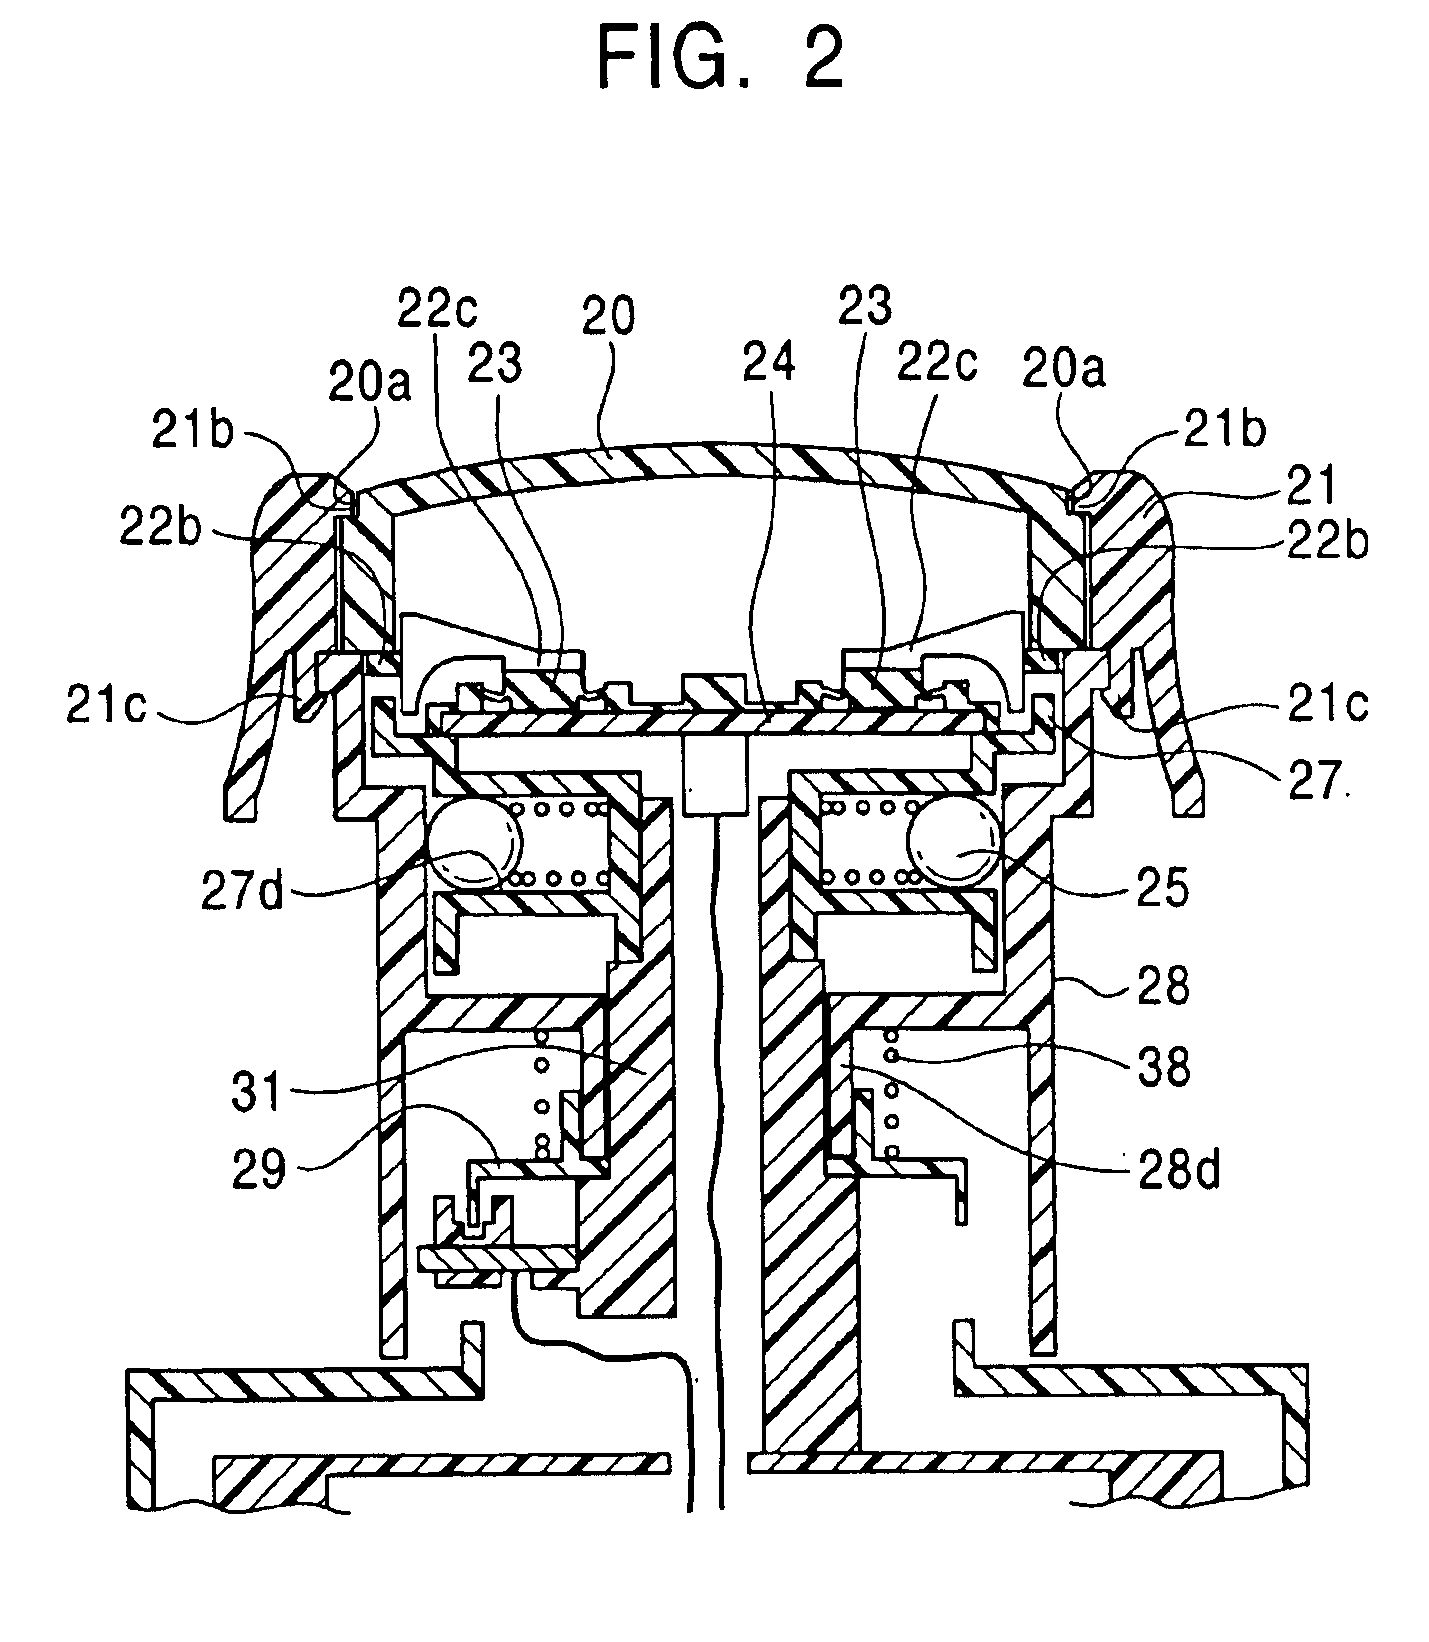 Rotary push switch device